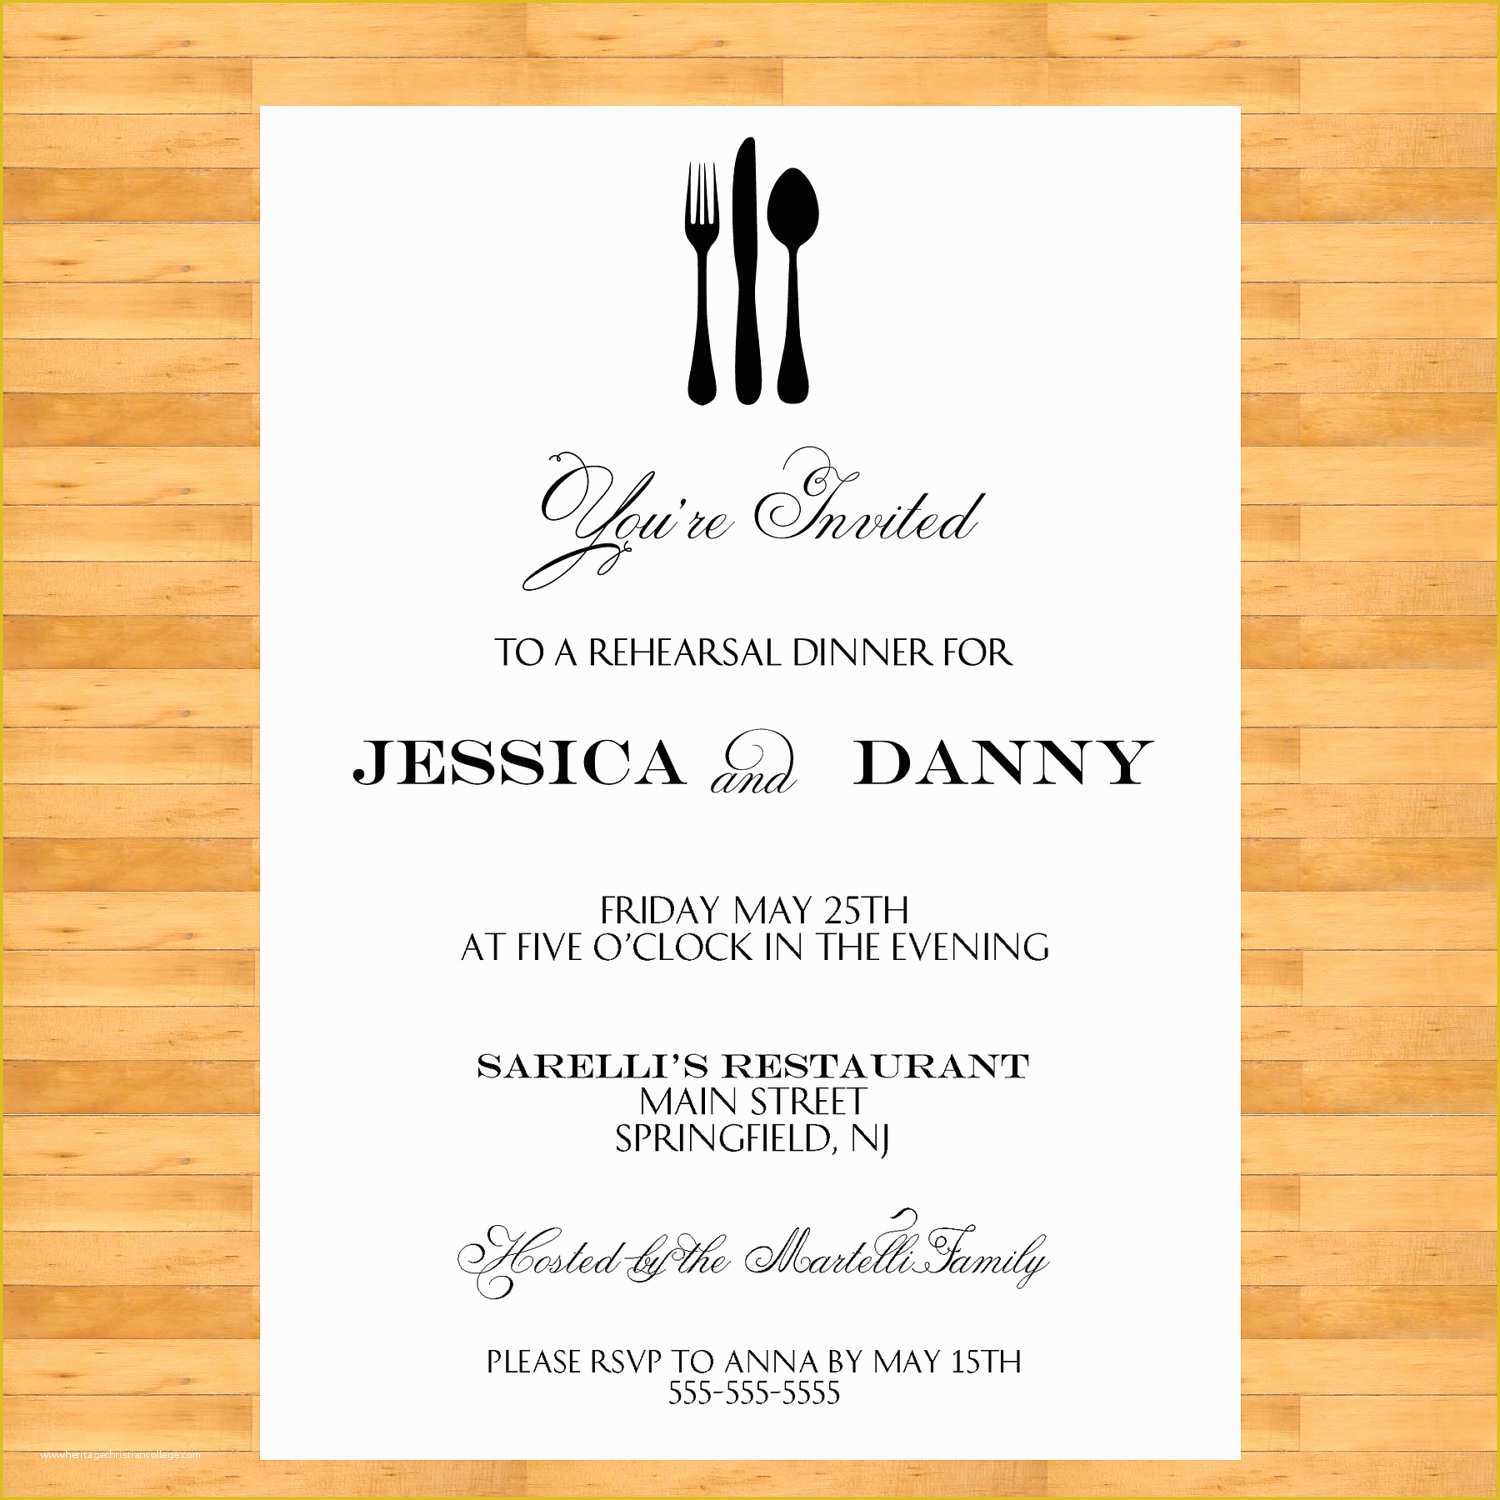 Free Dinner Party Invitation Templates Of Dinner Party Invitations Templates thebridgesummit Best